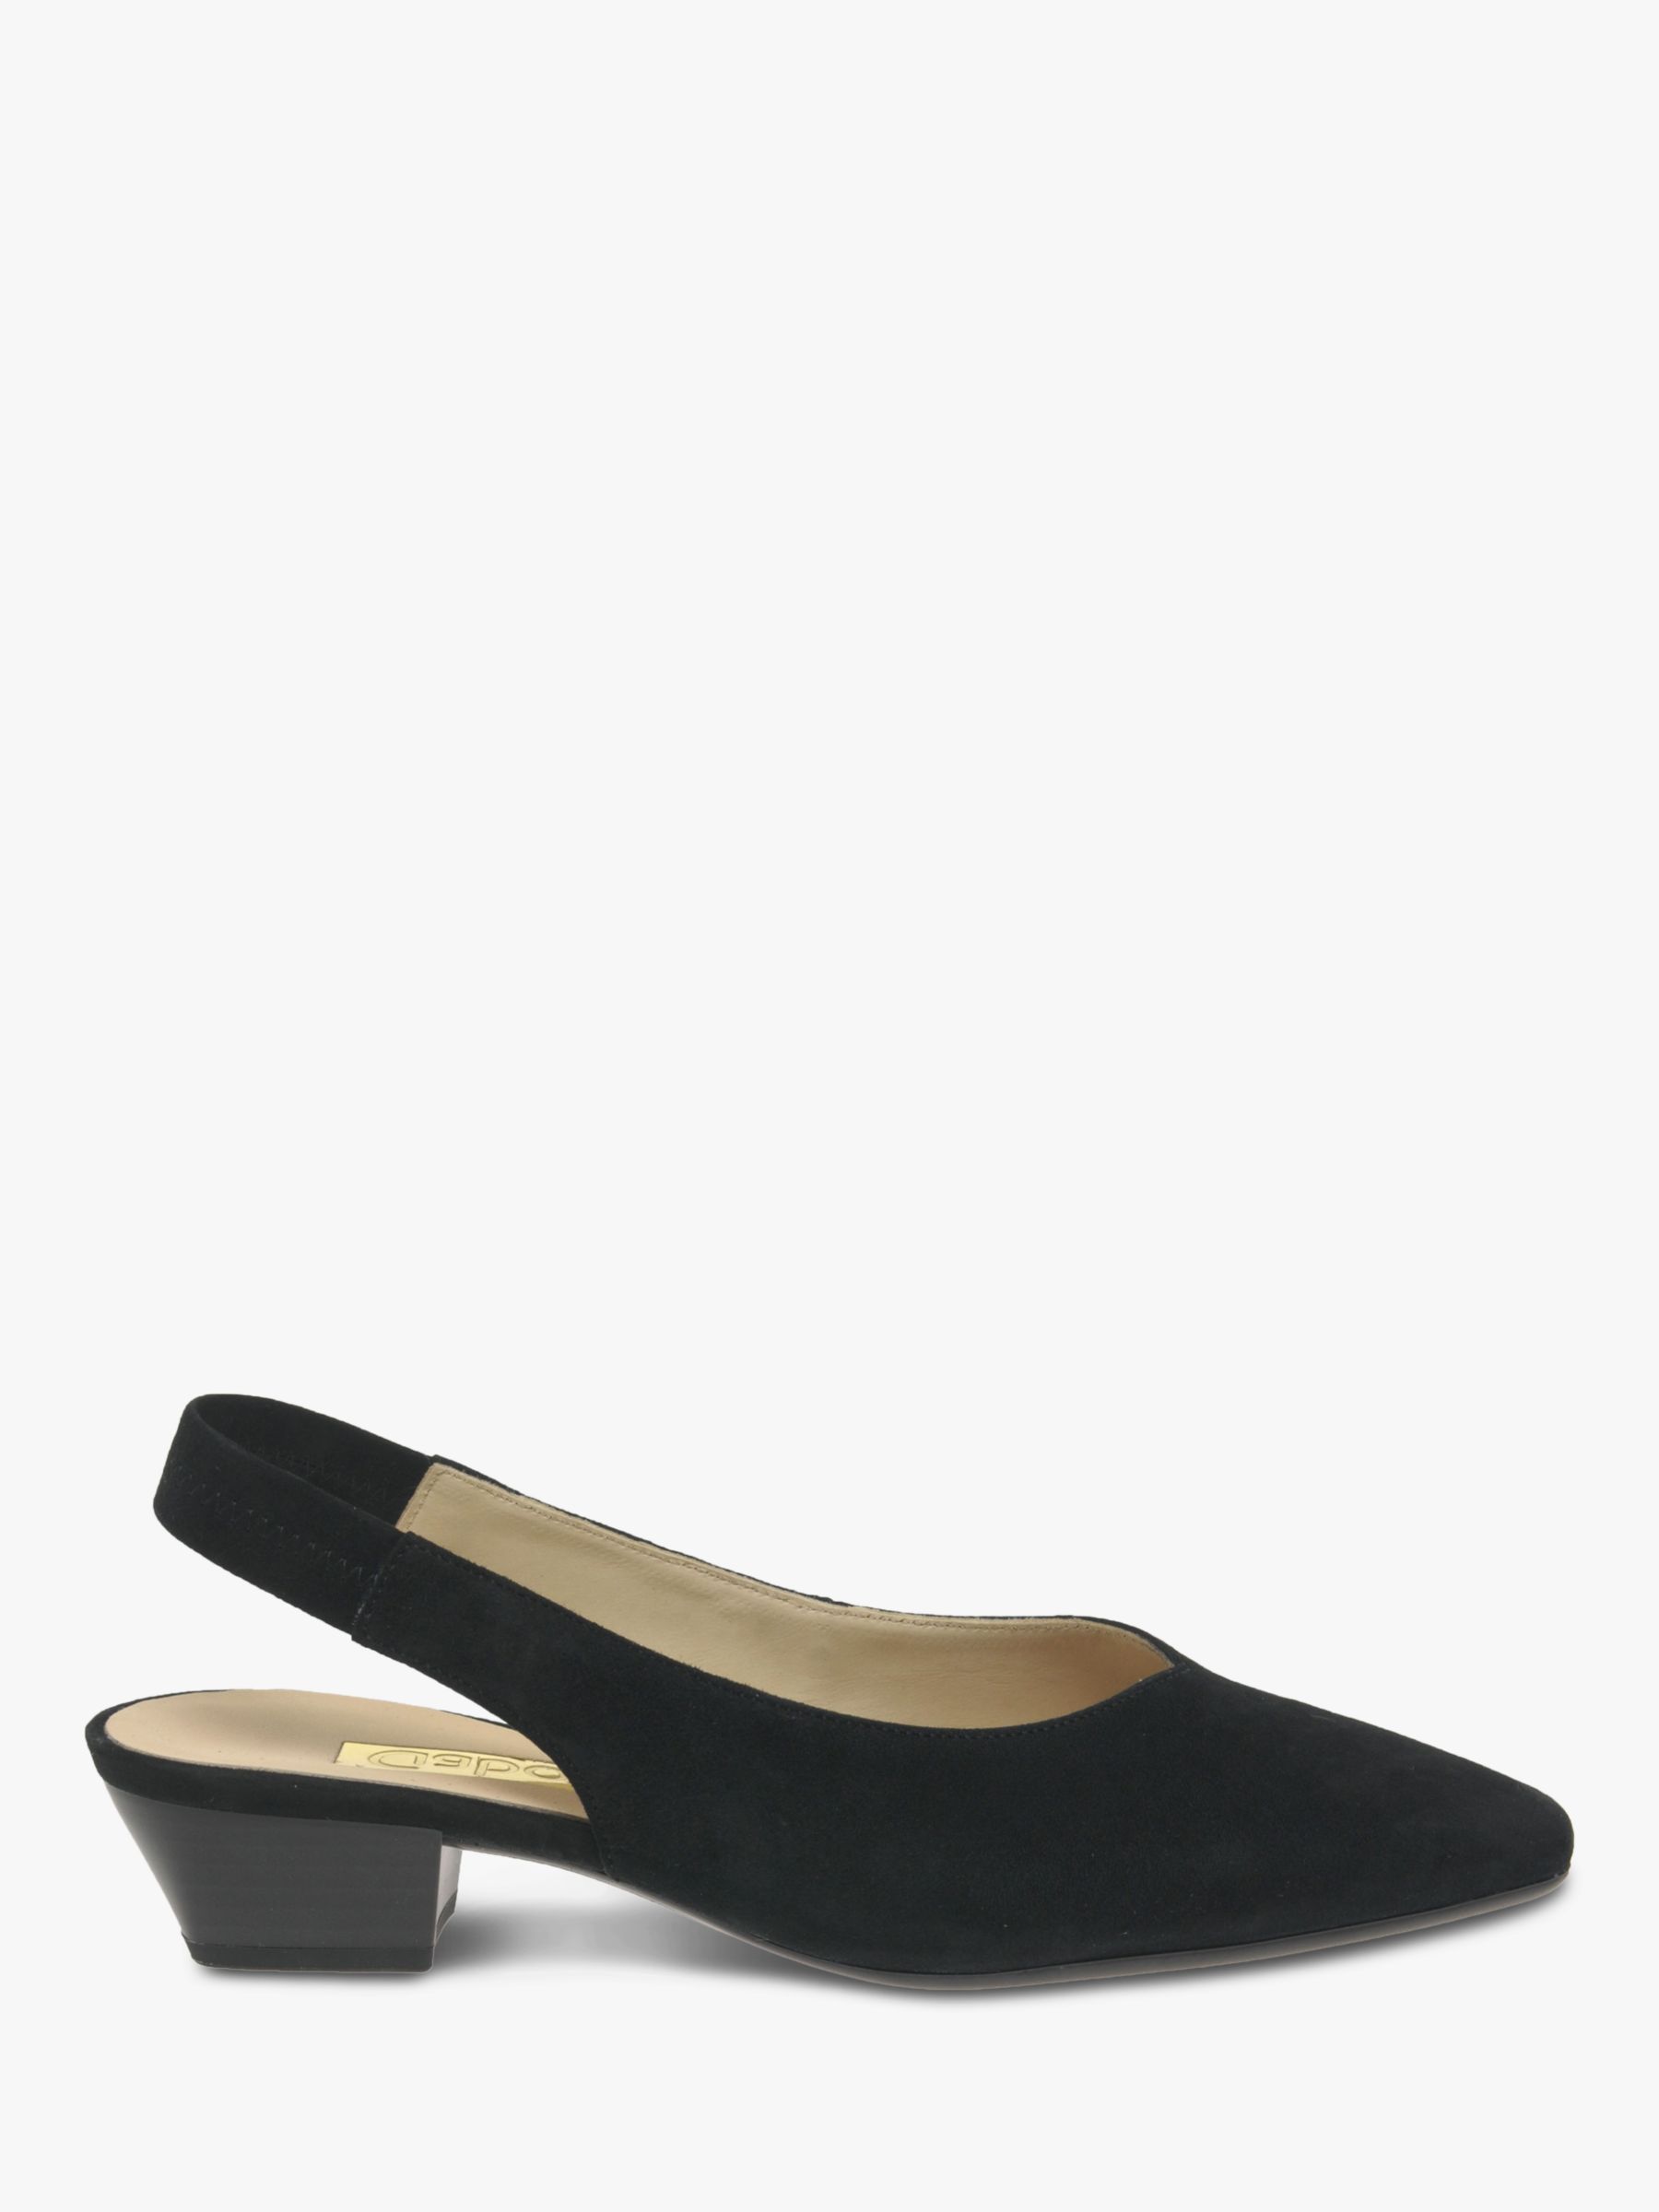 john lewis clearance gabor shoes